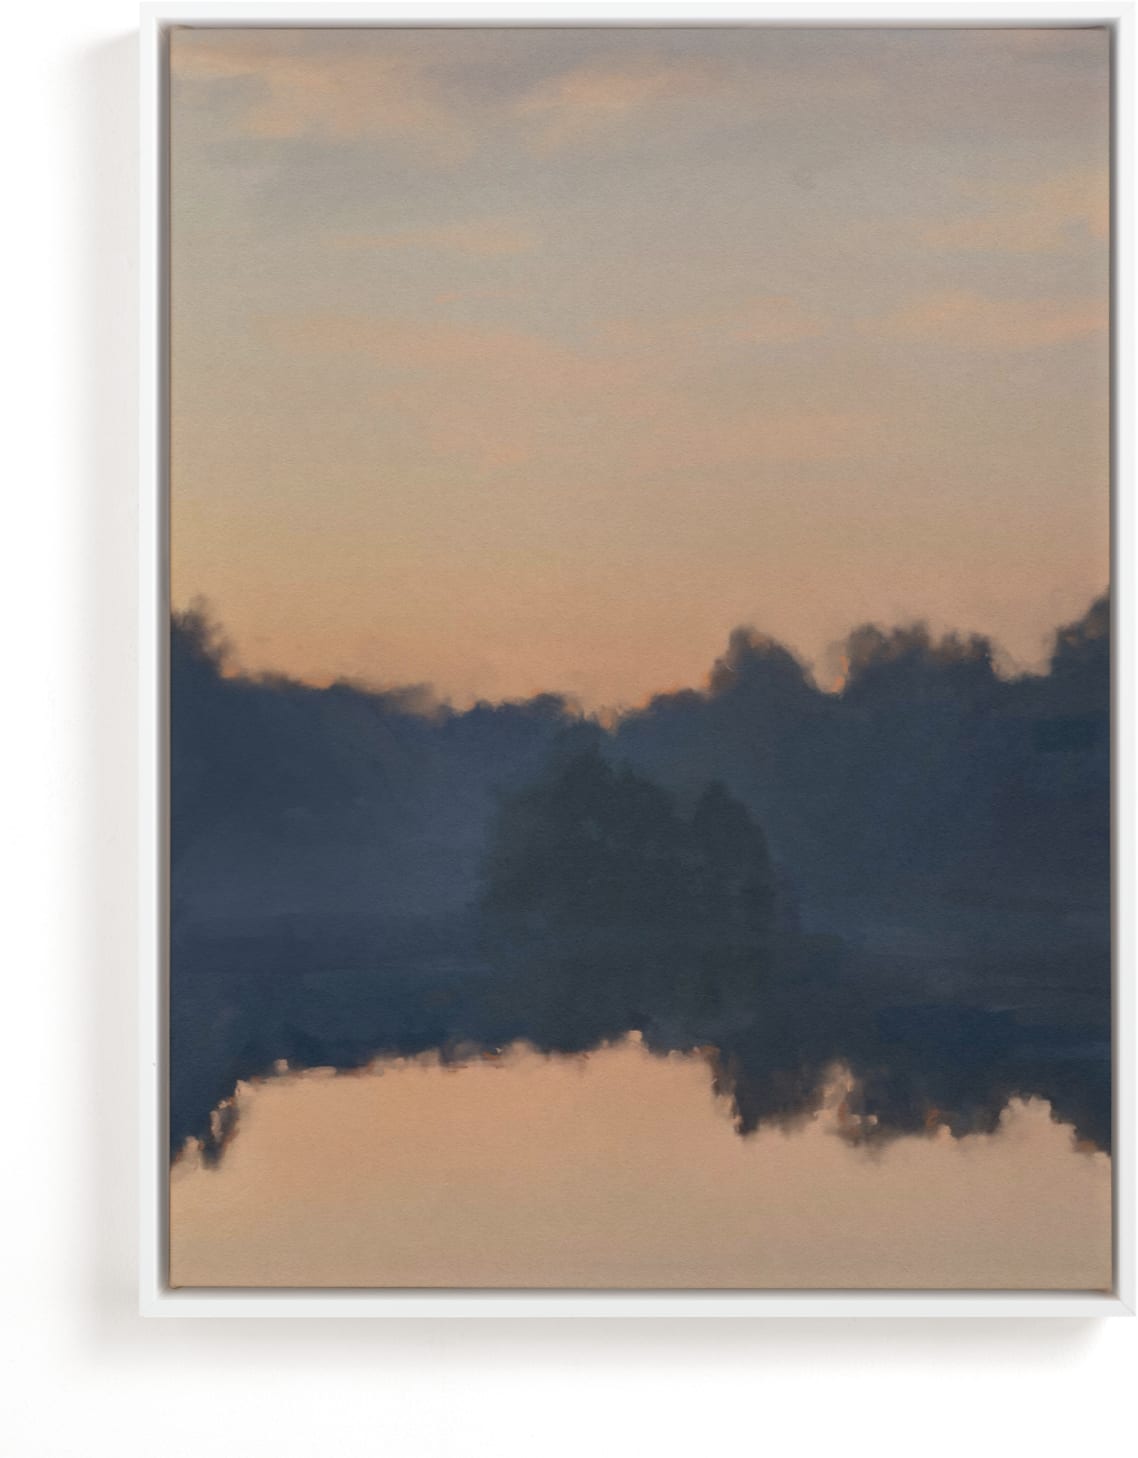 This is a blue, pink, orange art by Christa Kimble called Reflection at Sunset.